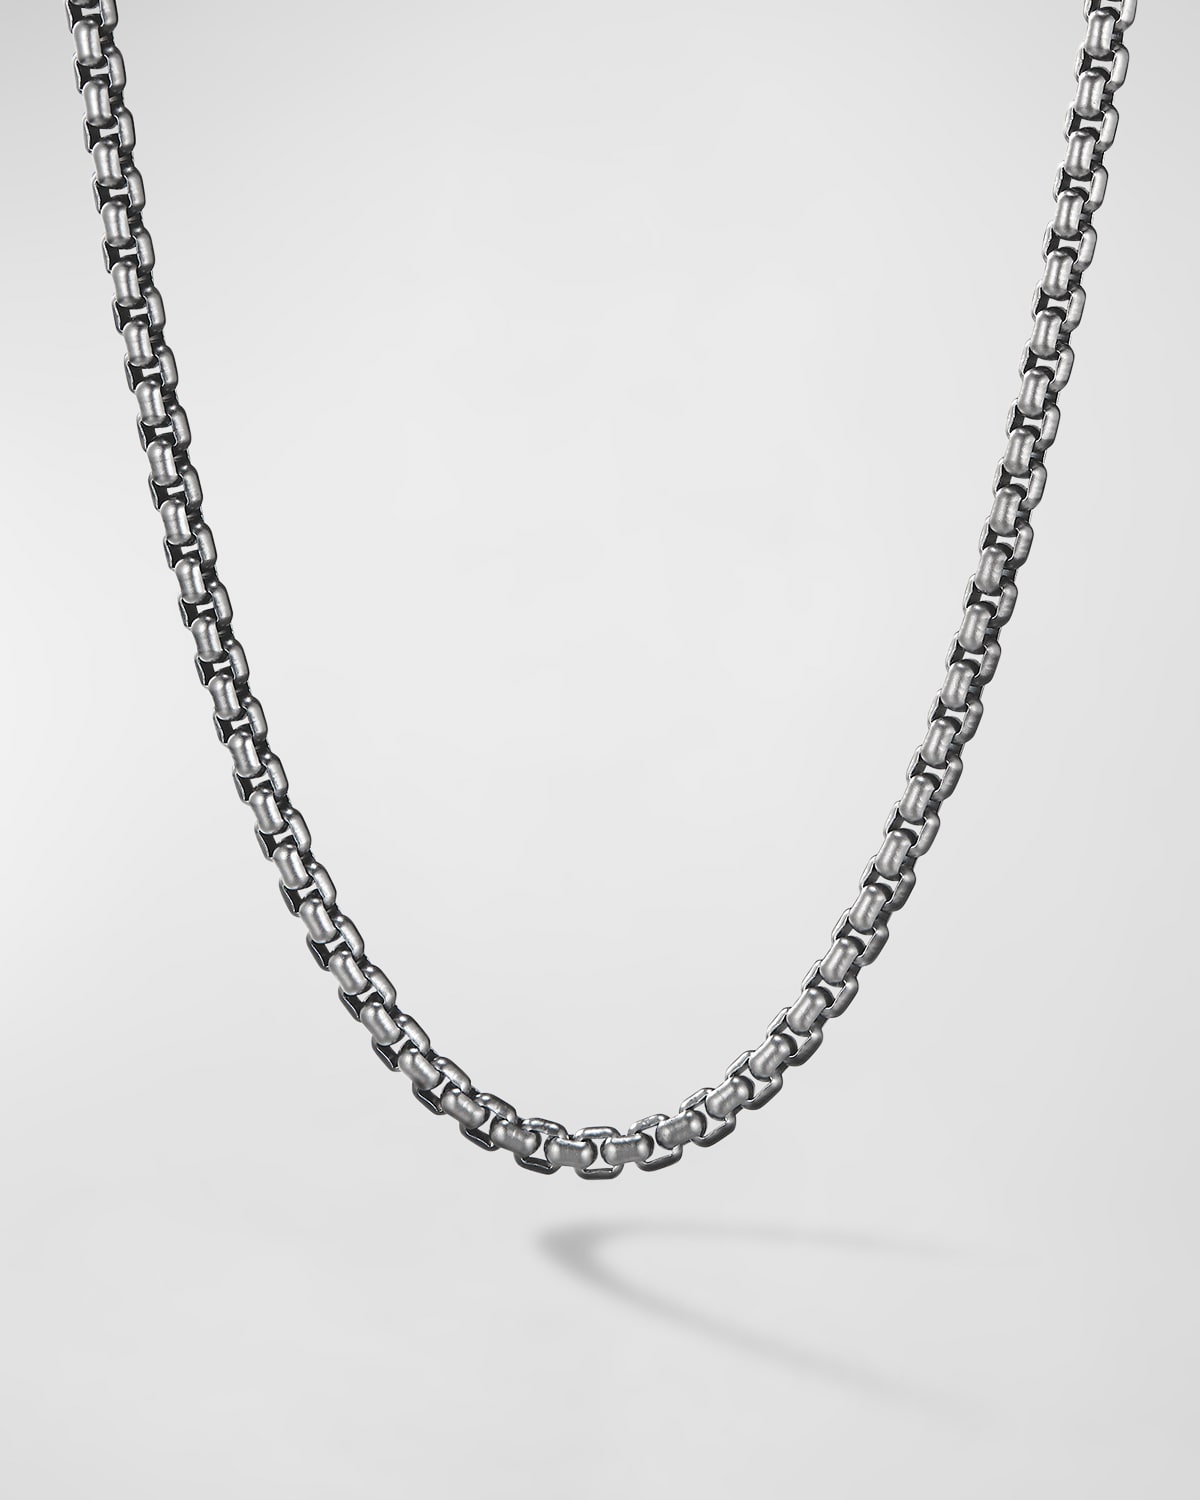 Men's Box Chain Necklace in Darkened Stainless Steel, 4mm, 22"L